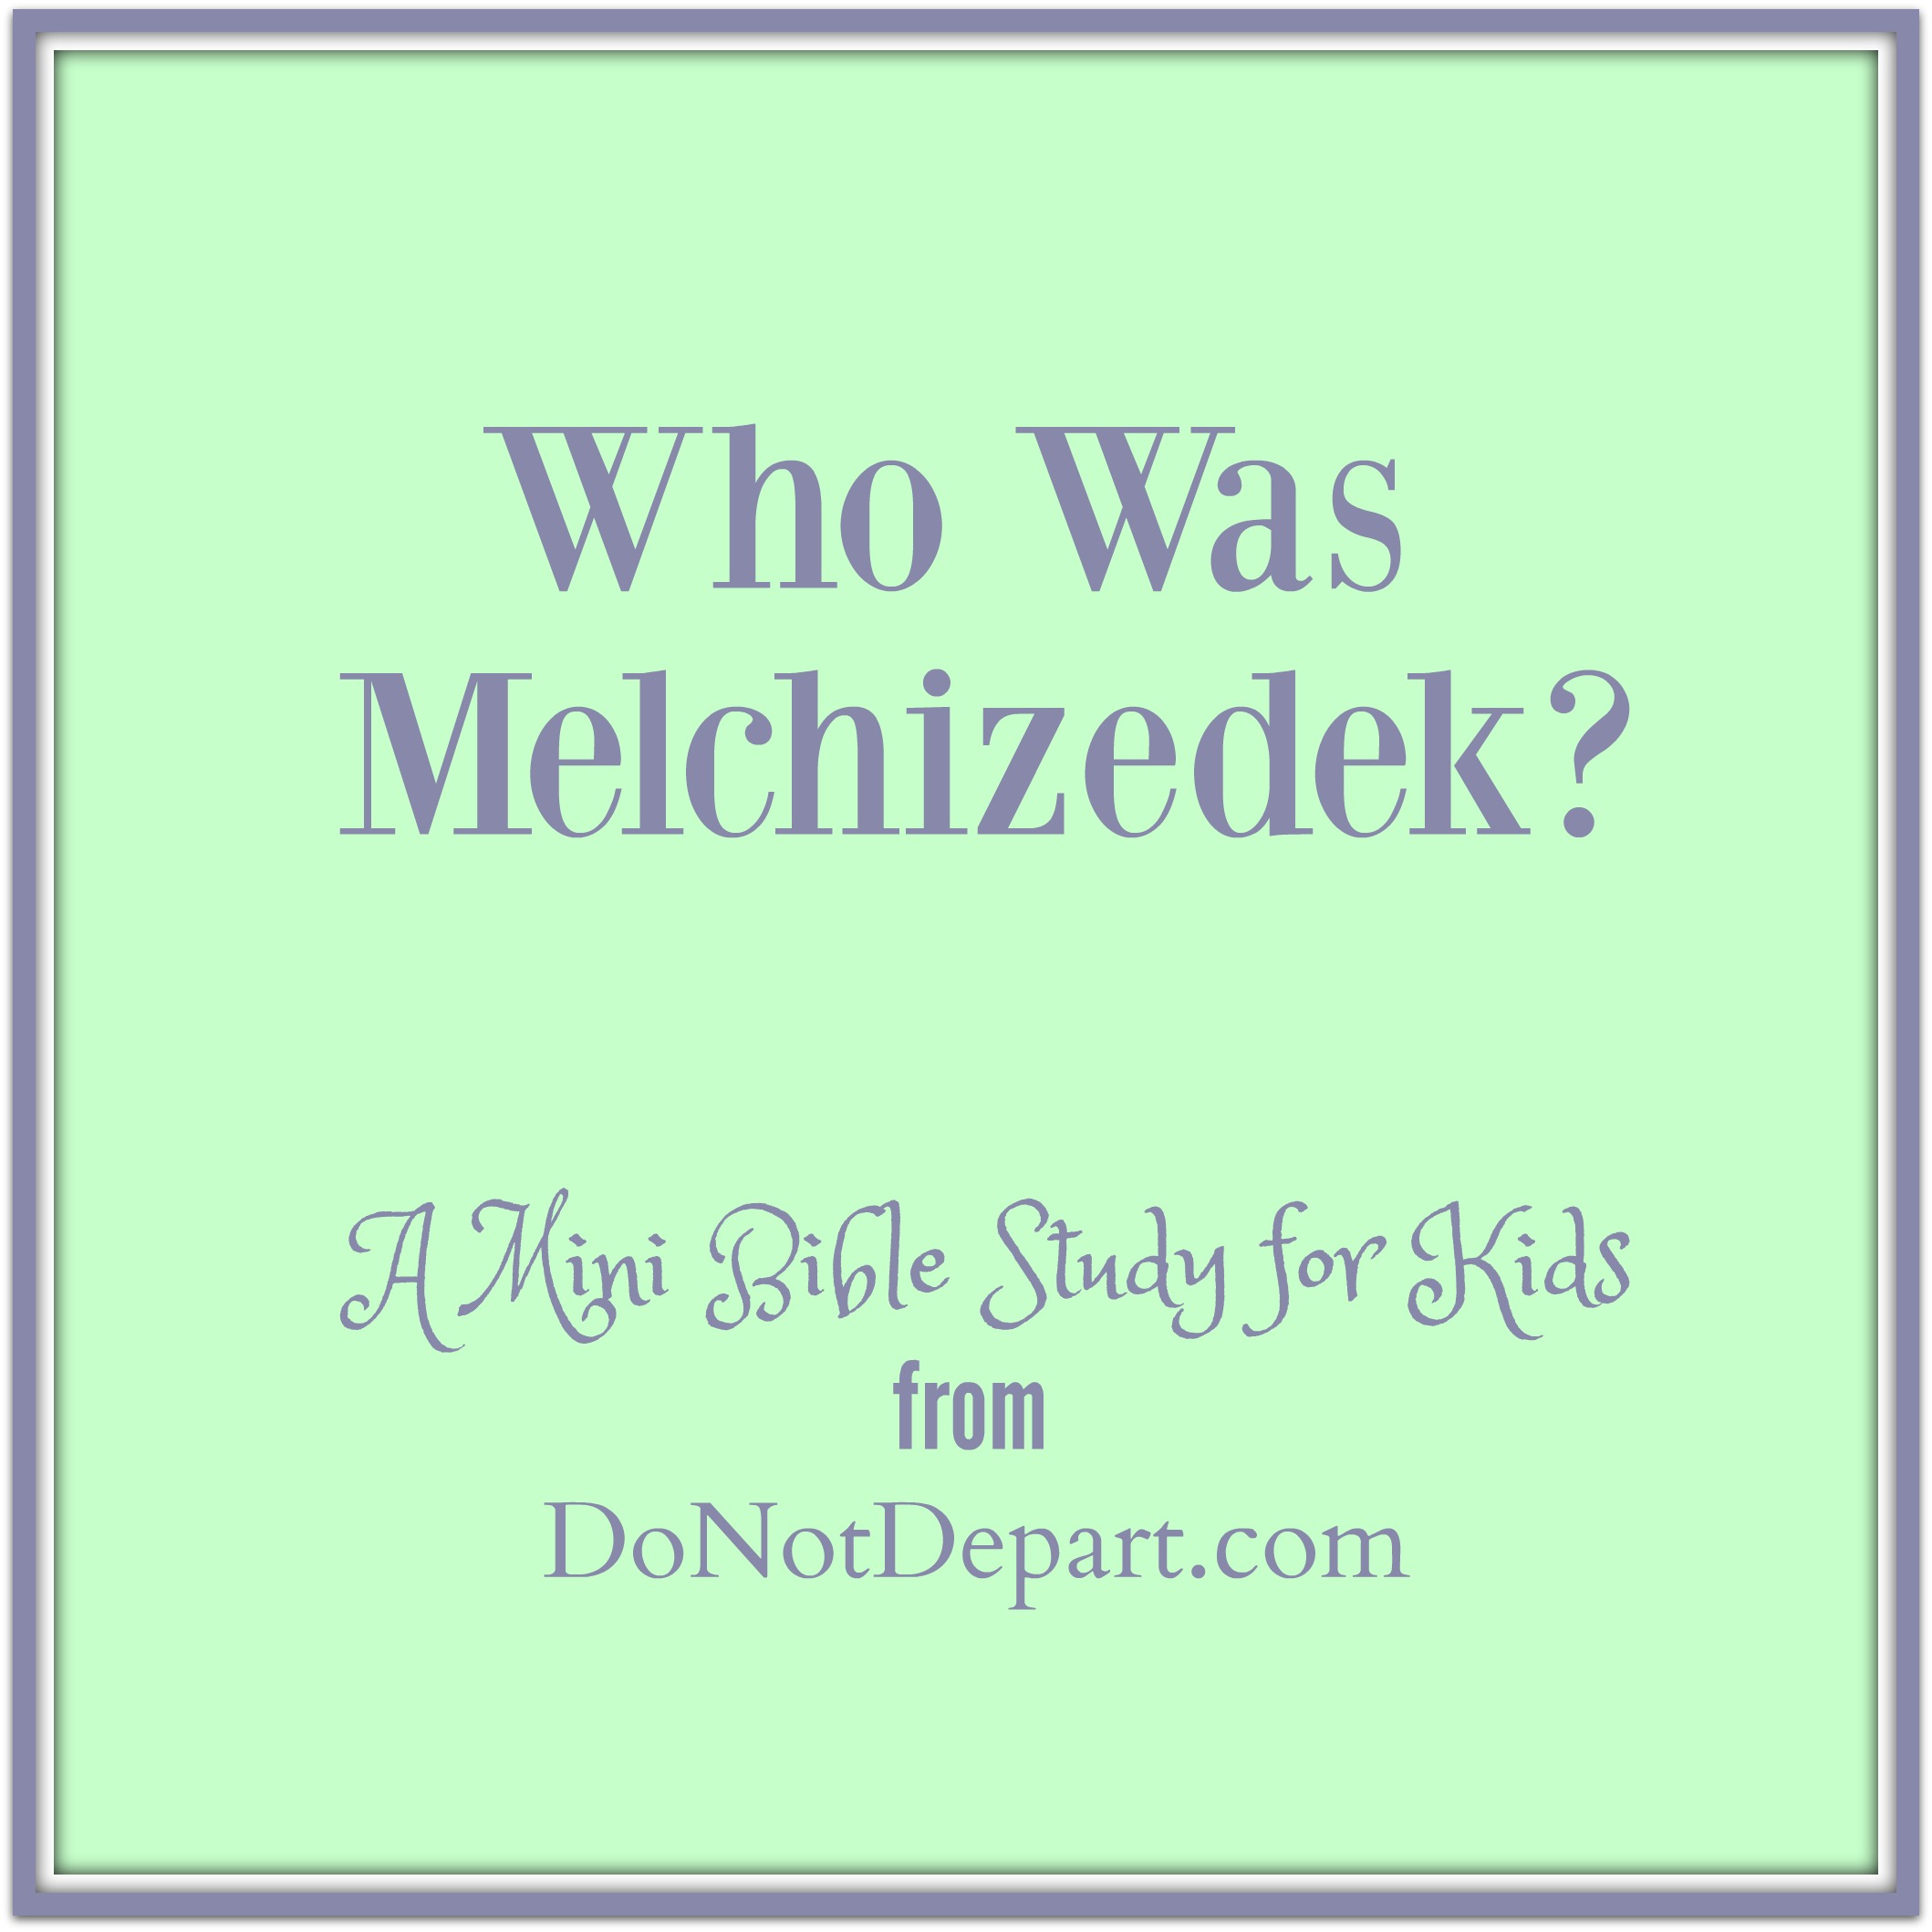 Who Was Melchizedek? (A Mini BIble Study for Kids) - download this free printable bible study from DoNotDepart.com